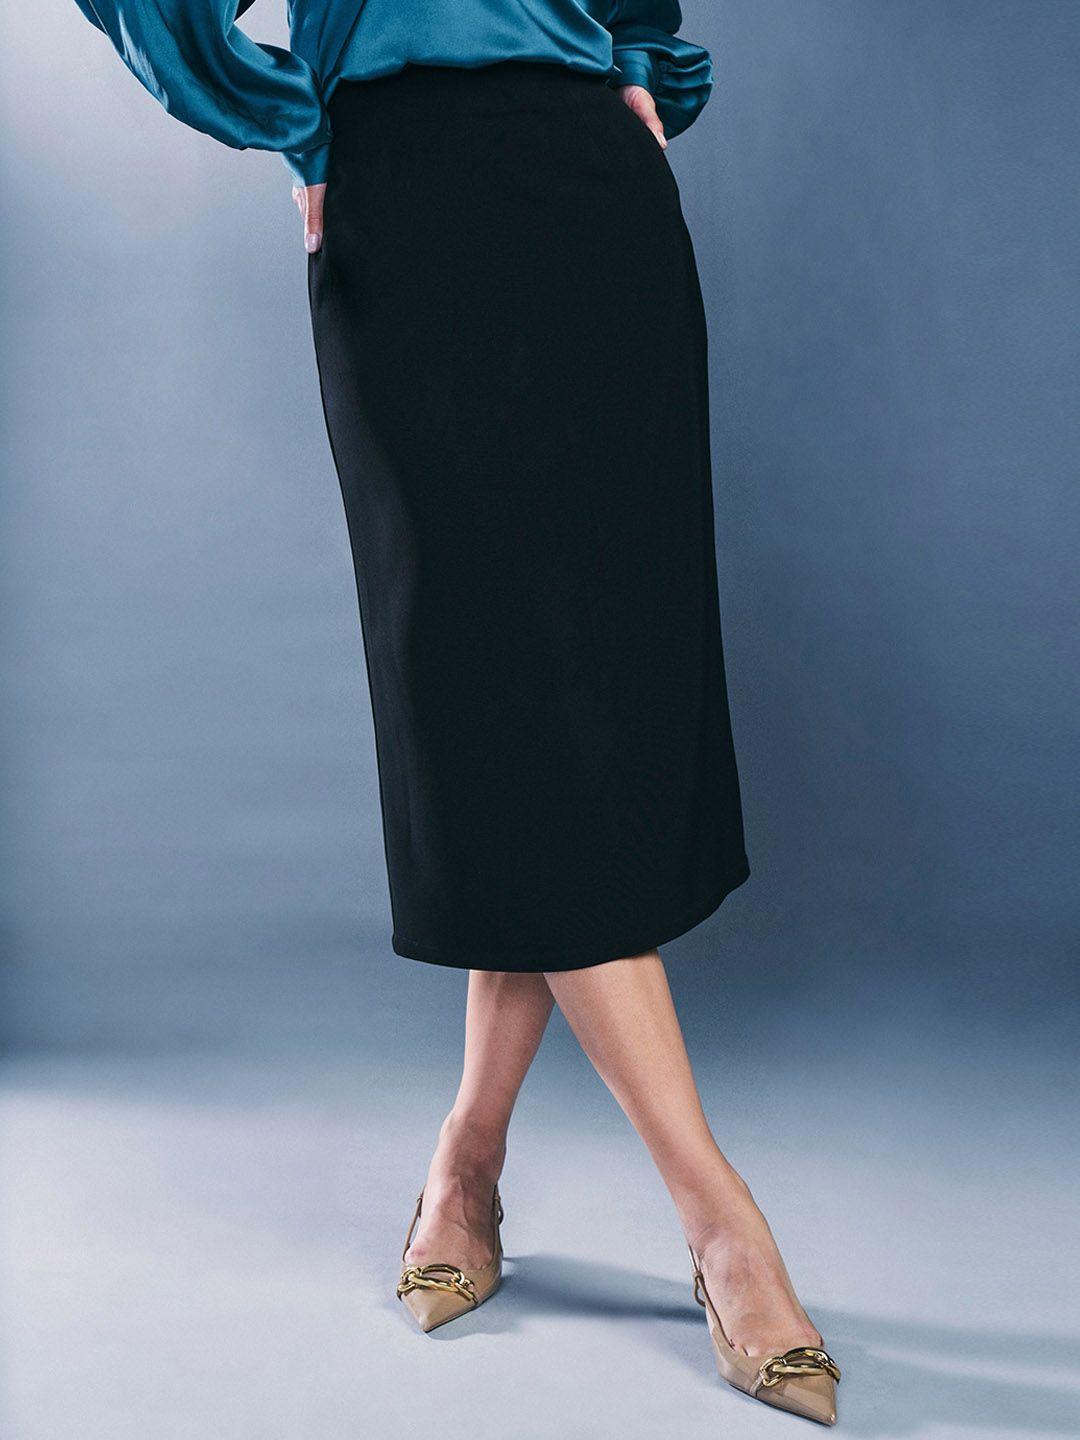 and-mid-rise-a-line-midi-skirt